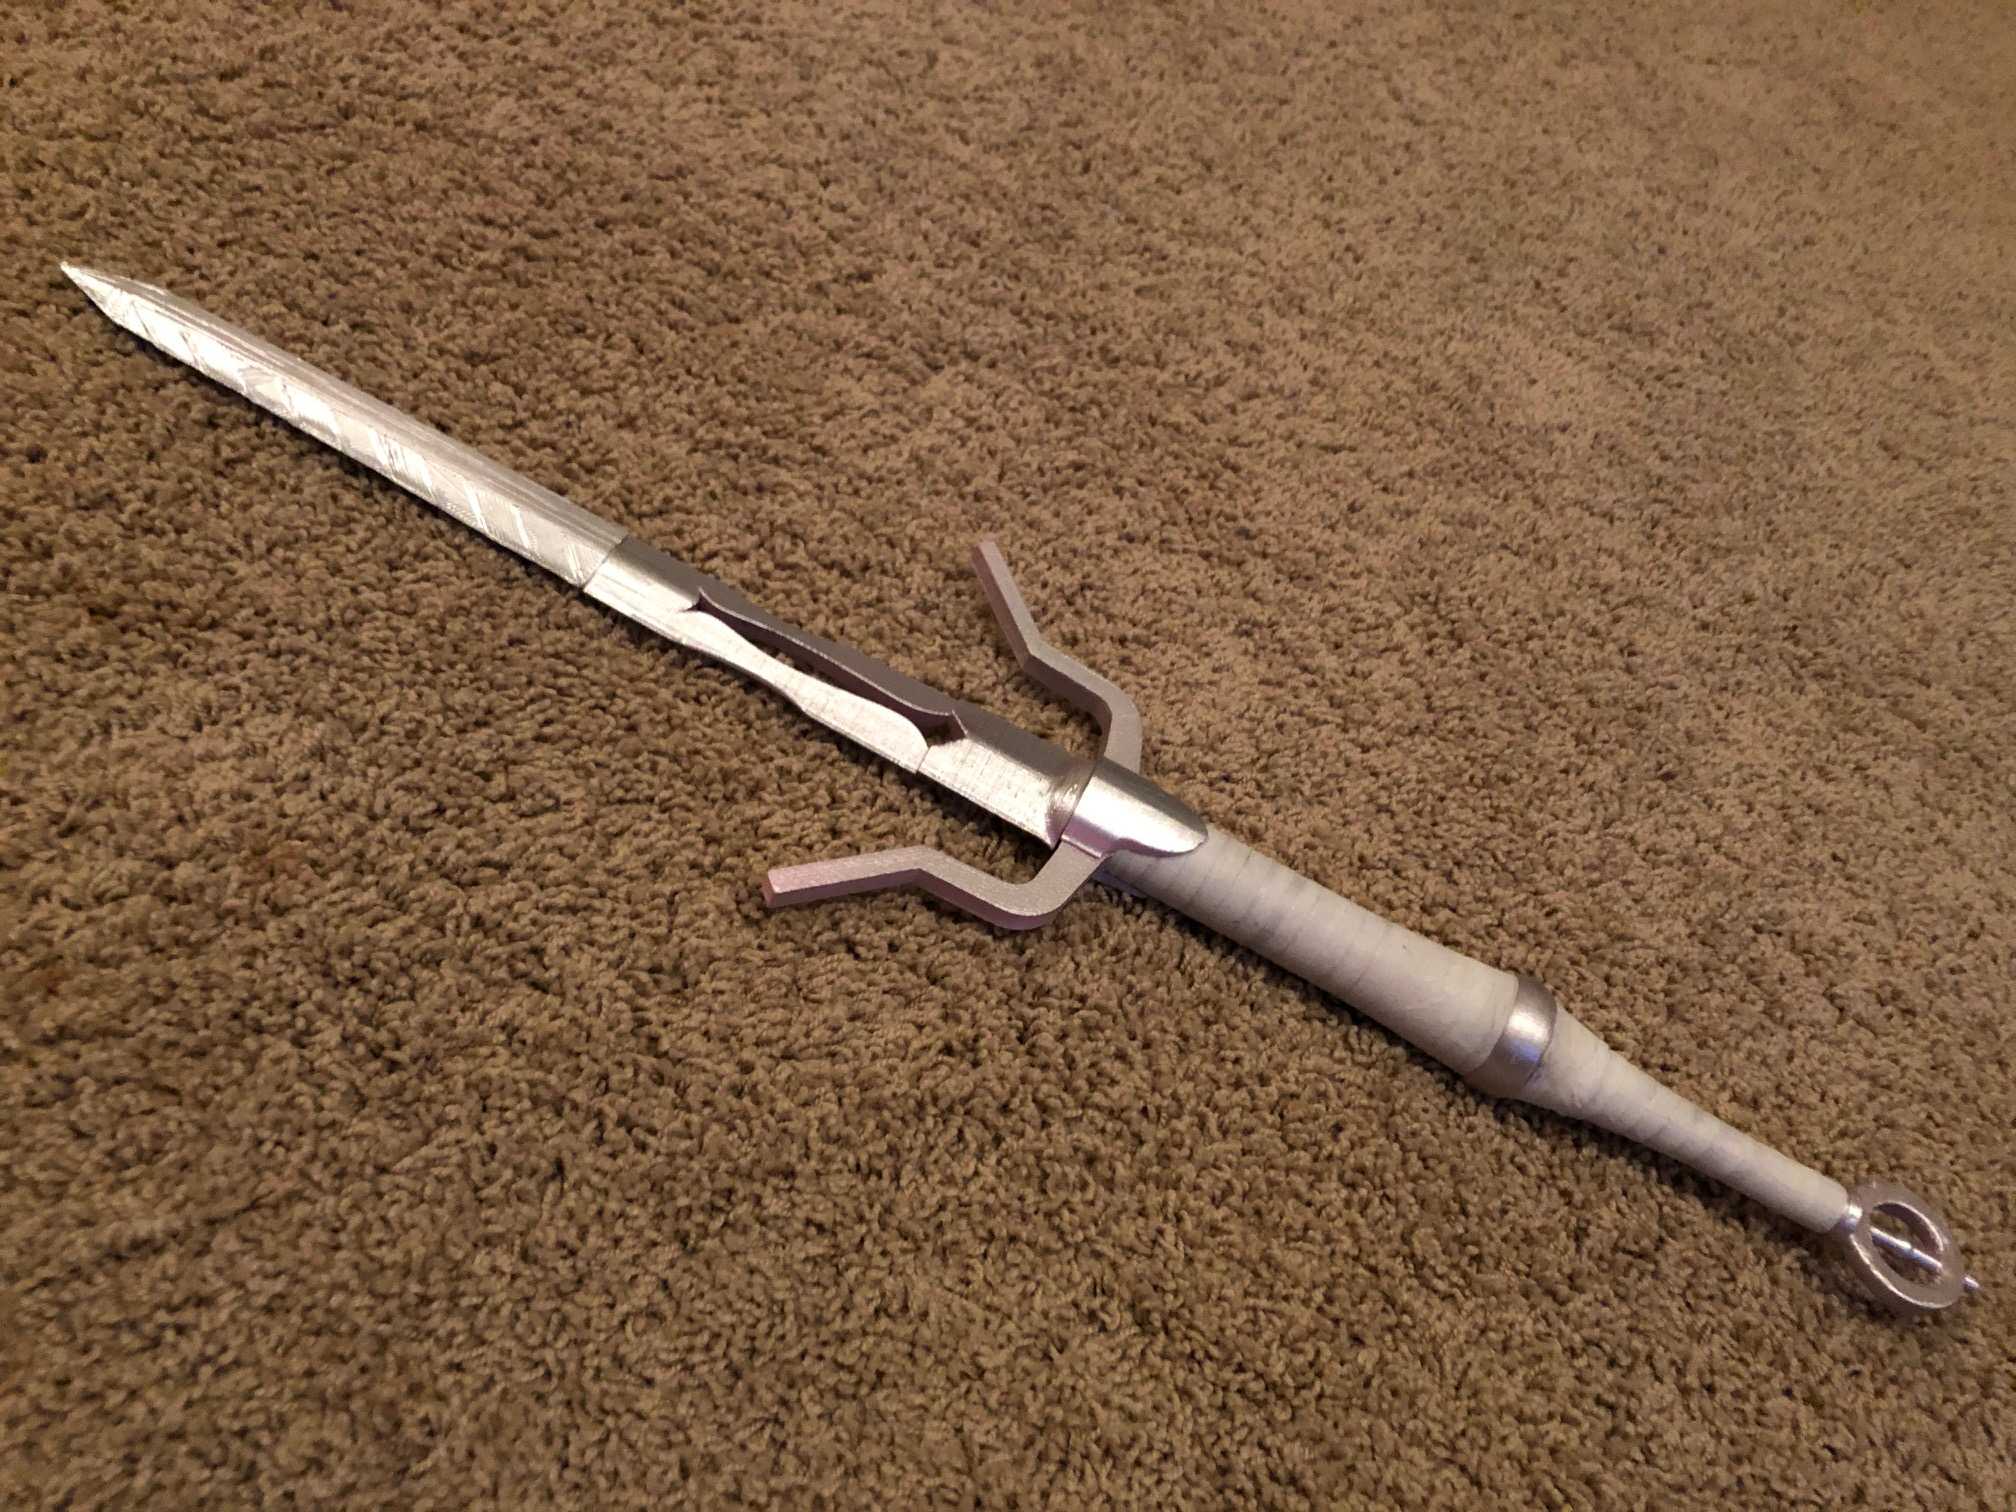 Ciri's sword from the Witcher 3